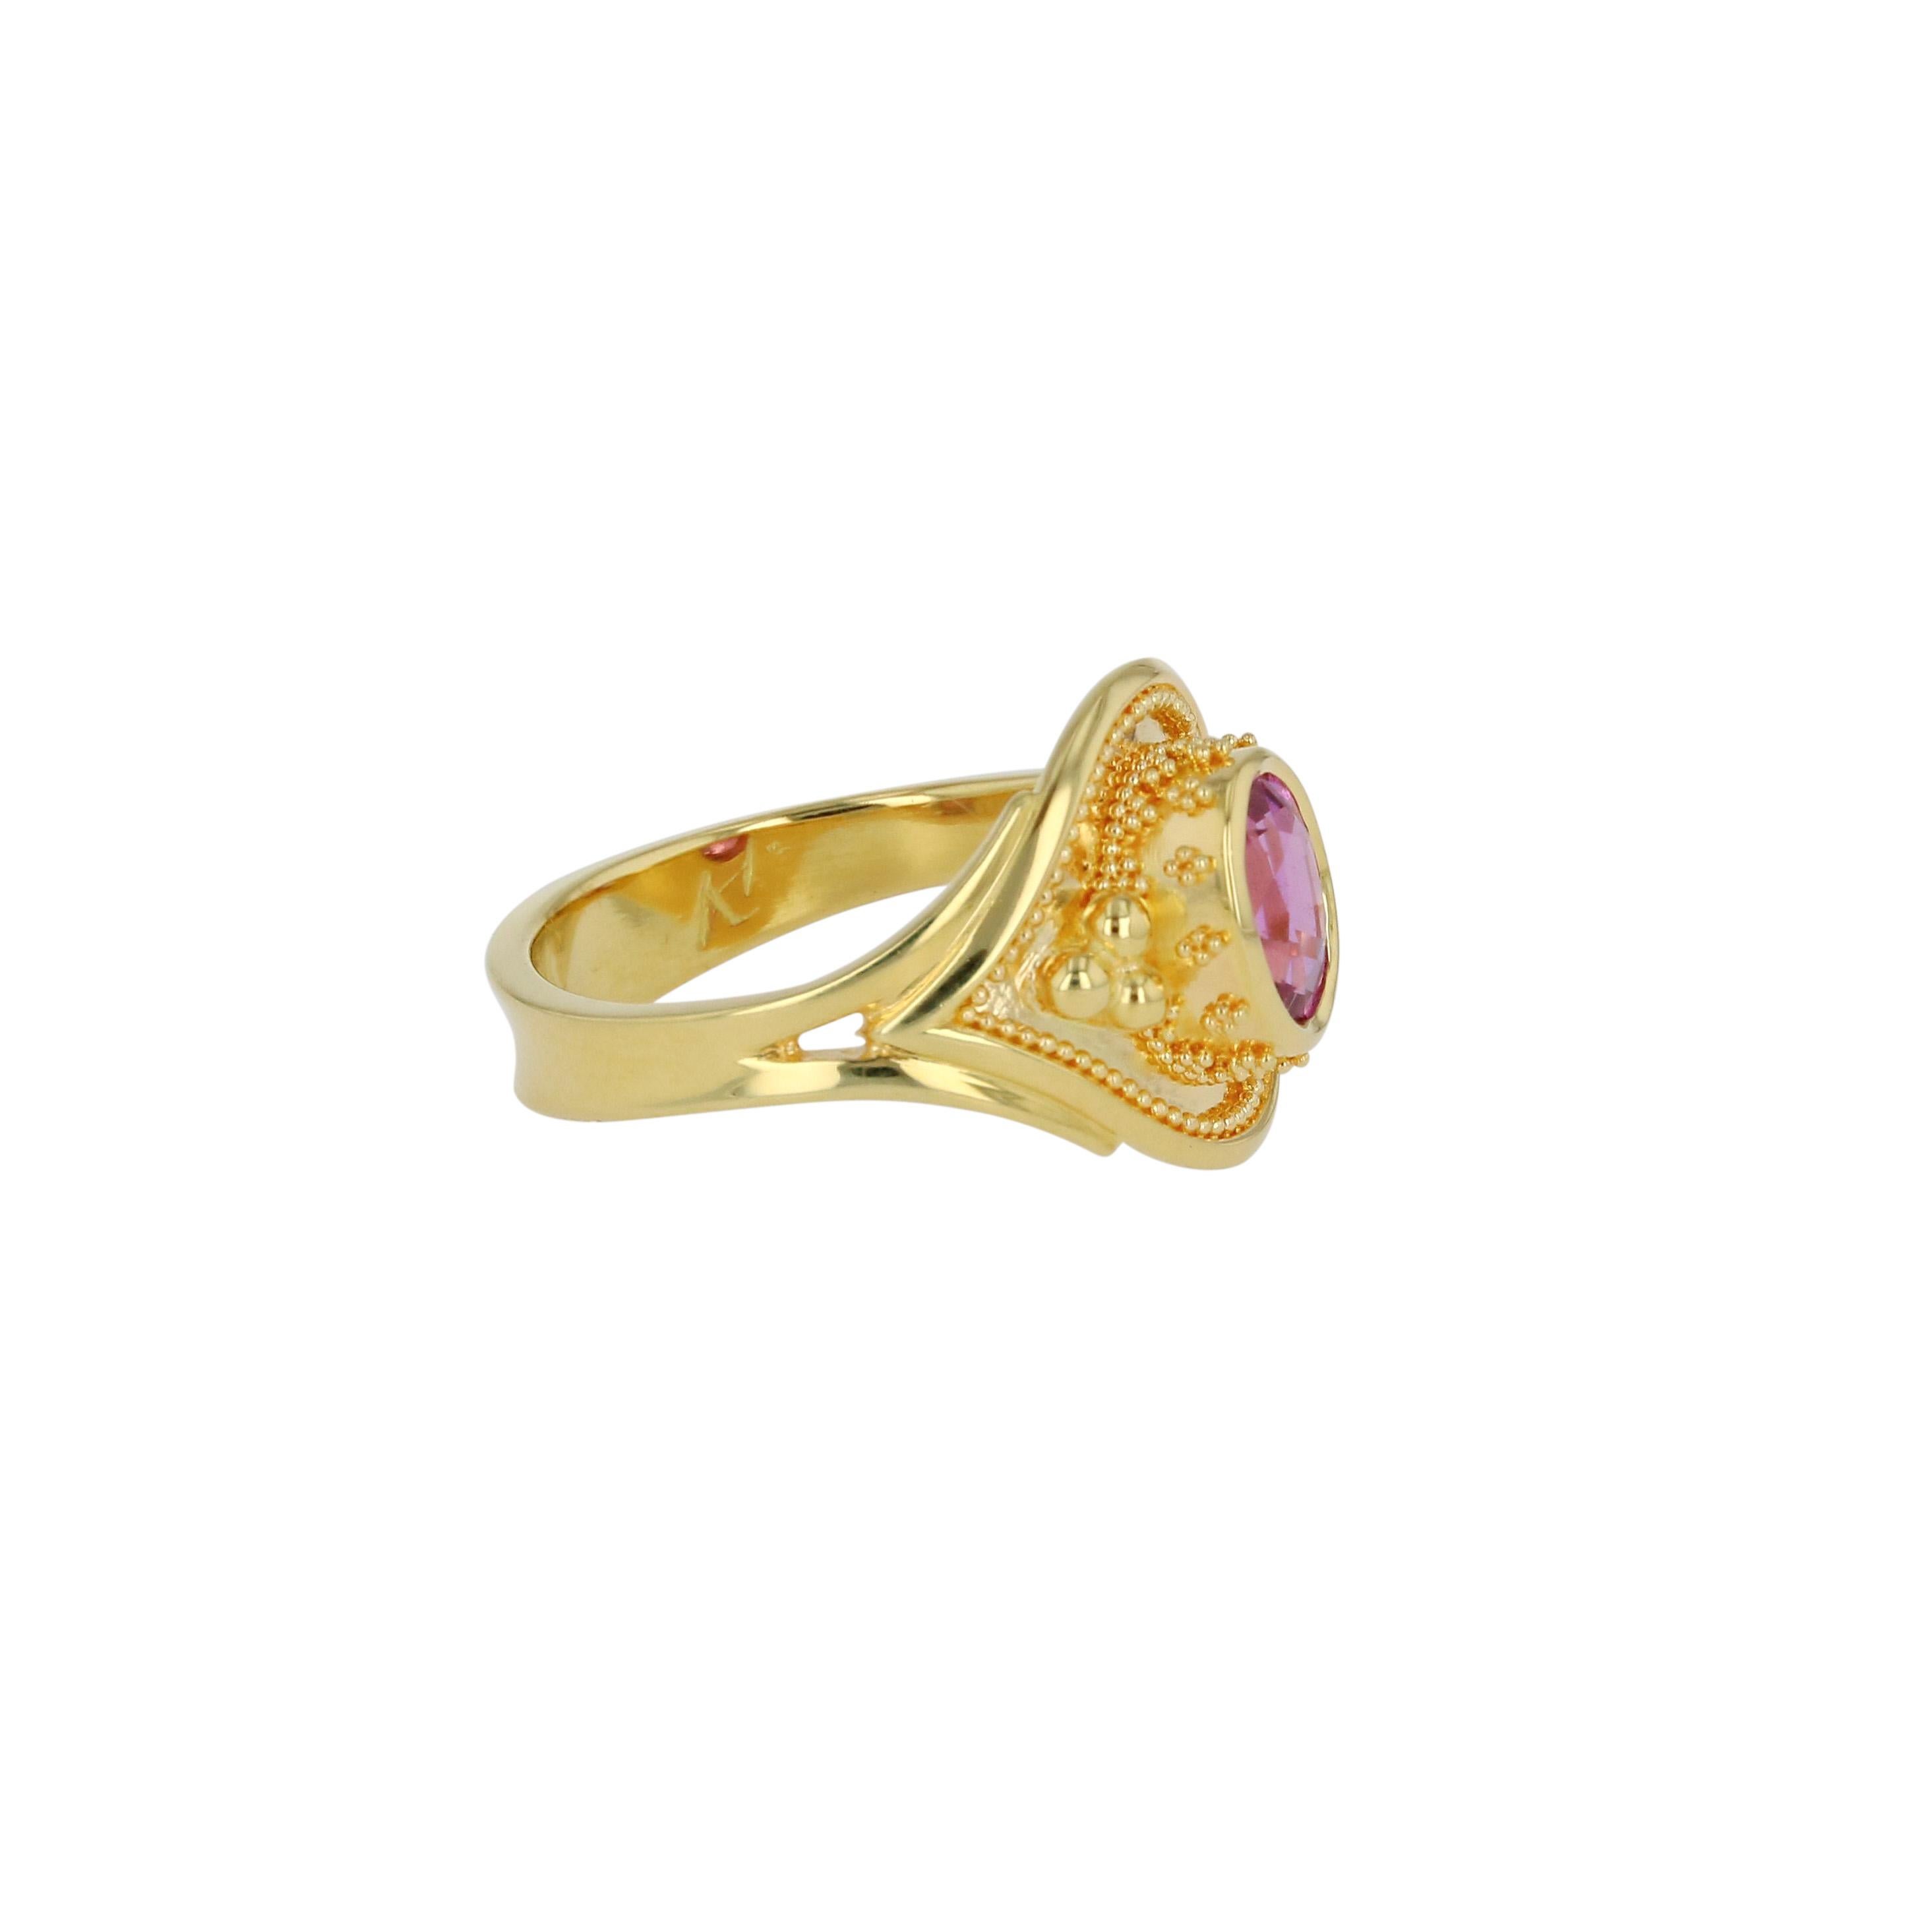 Artisan Kent Raible Pink Sapphire Solitaire Ring with 18 Karat Gold Fine Granulation For Sale